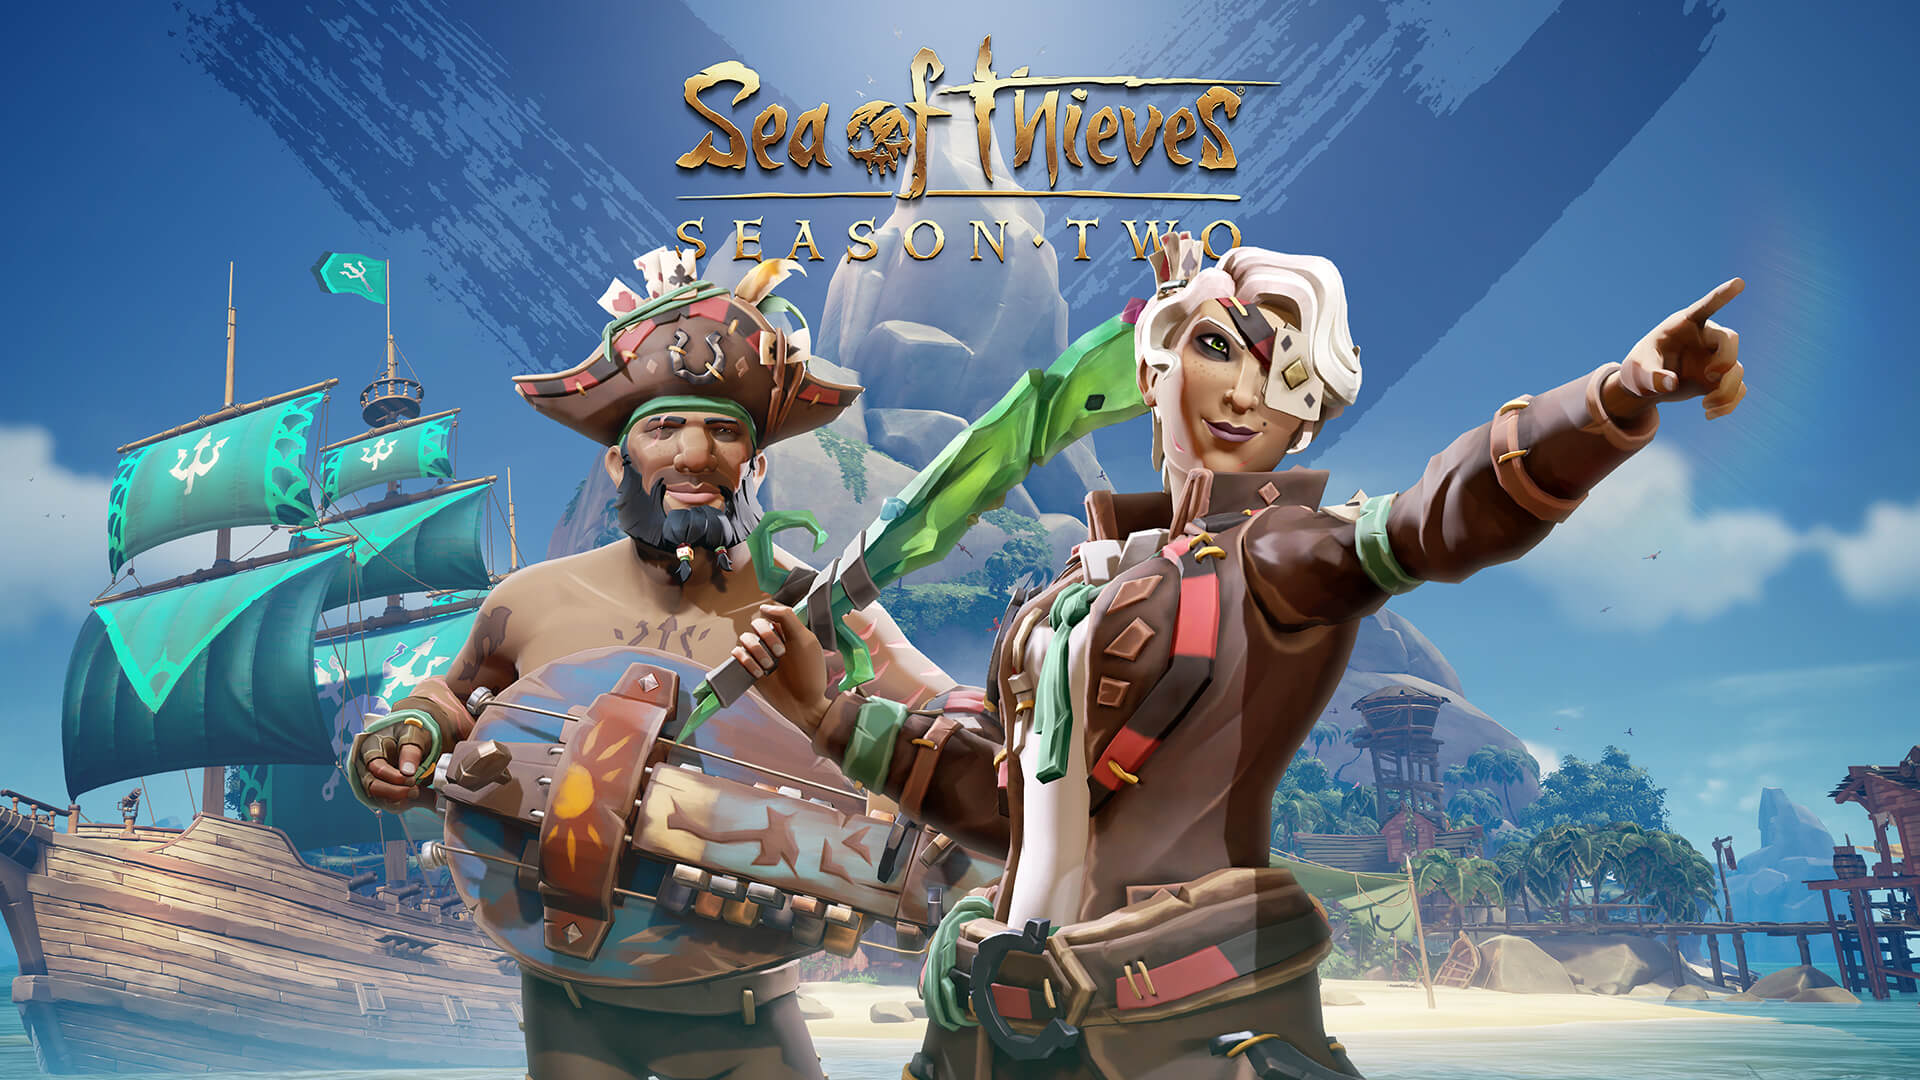 Video For Fortunes to Be Found in Sea of Thieves Season Two